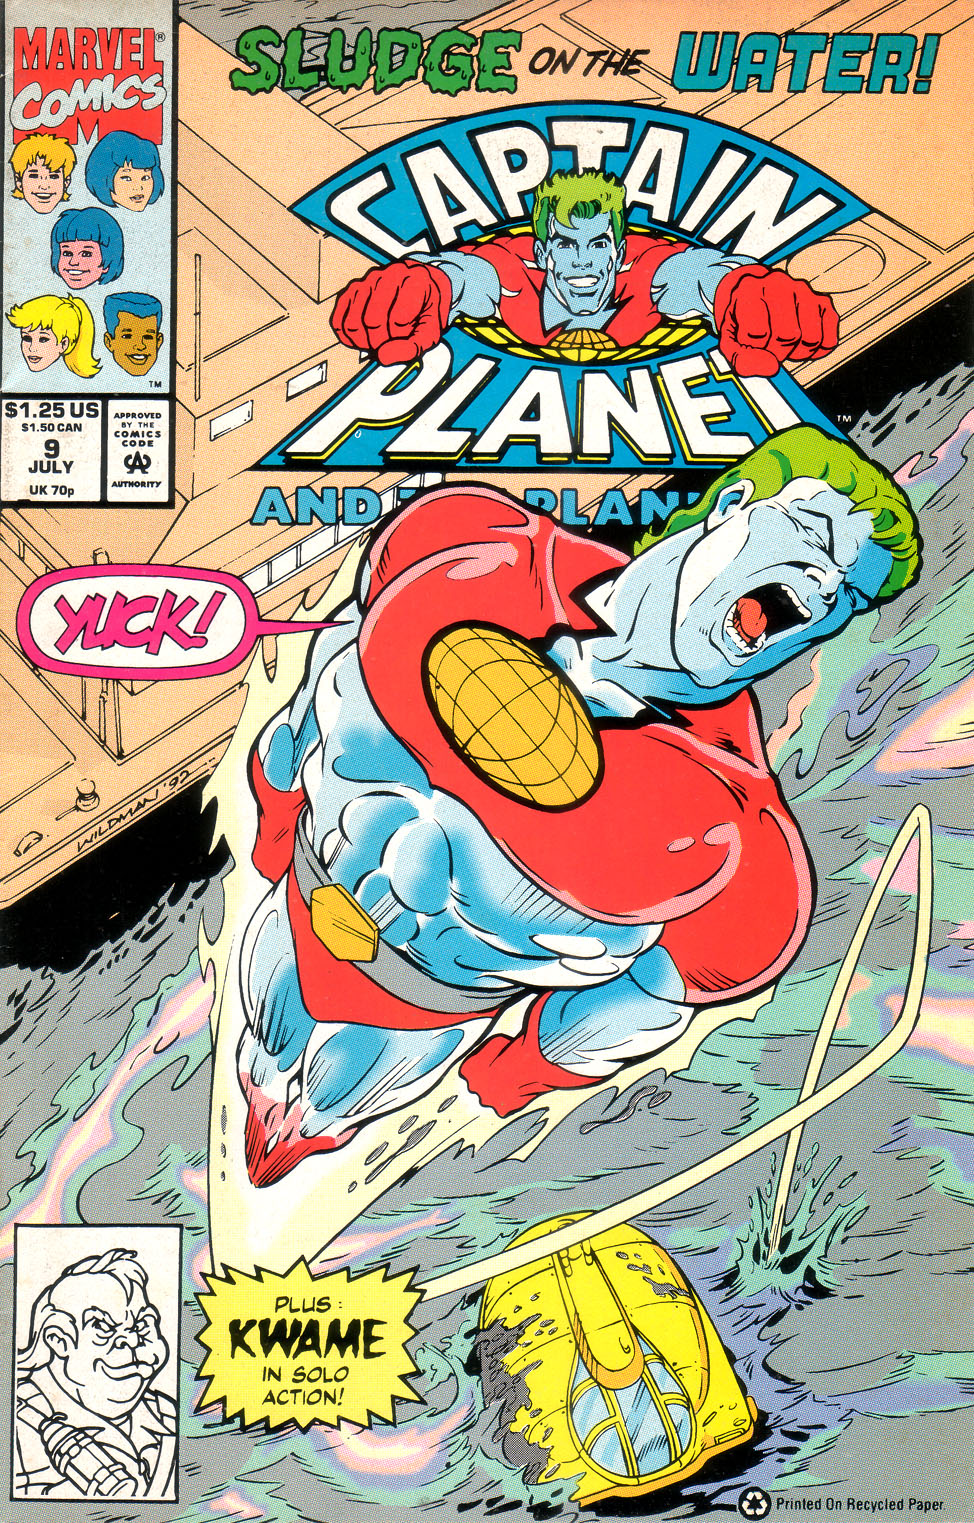 Shemale Captain Planet - Captain Planet And The Planeteers Issue 9 | Read Captain Planet And The  Planeteers Issue 9 comic online in high quality. Read Full Comic online for  free - Read comics online in